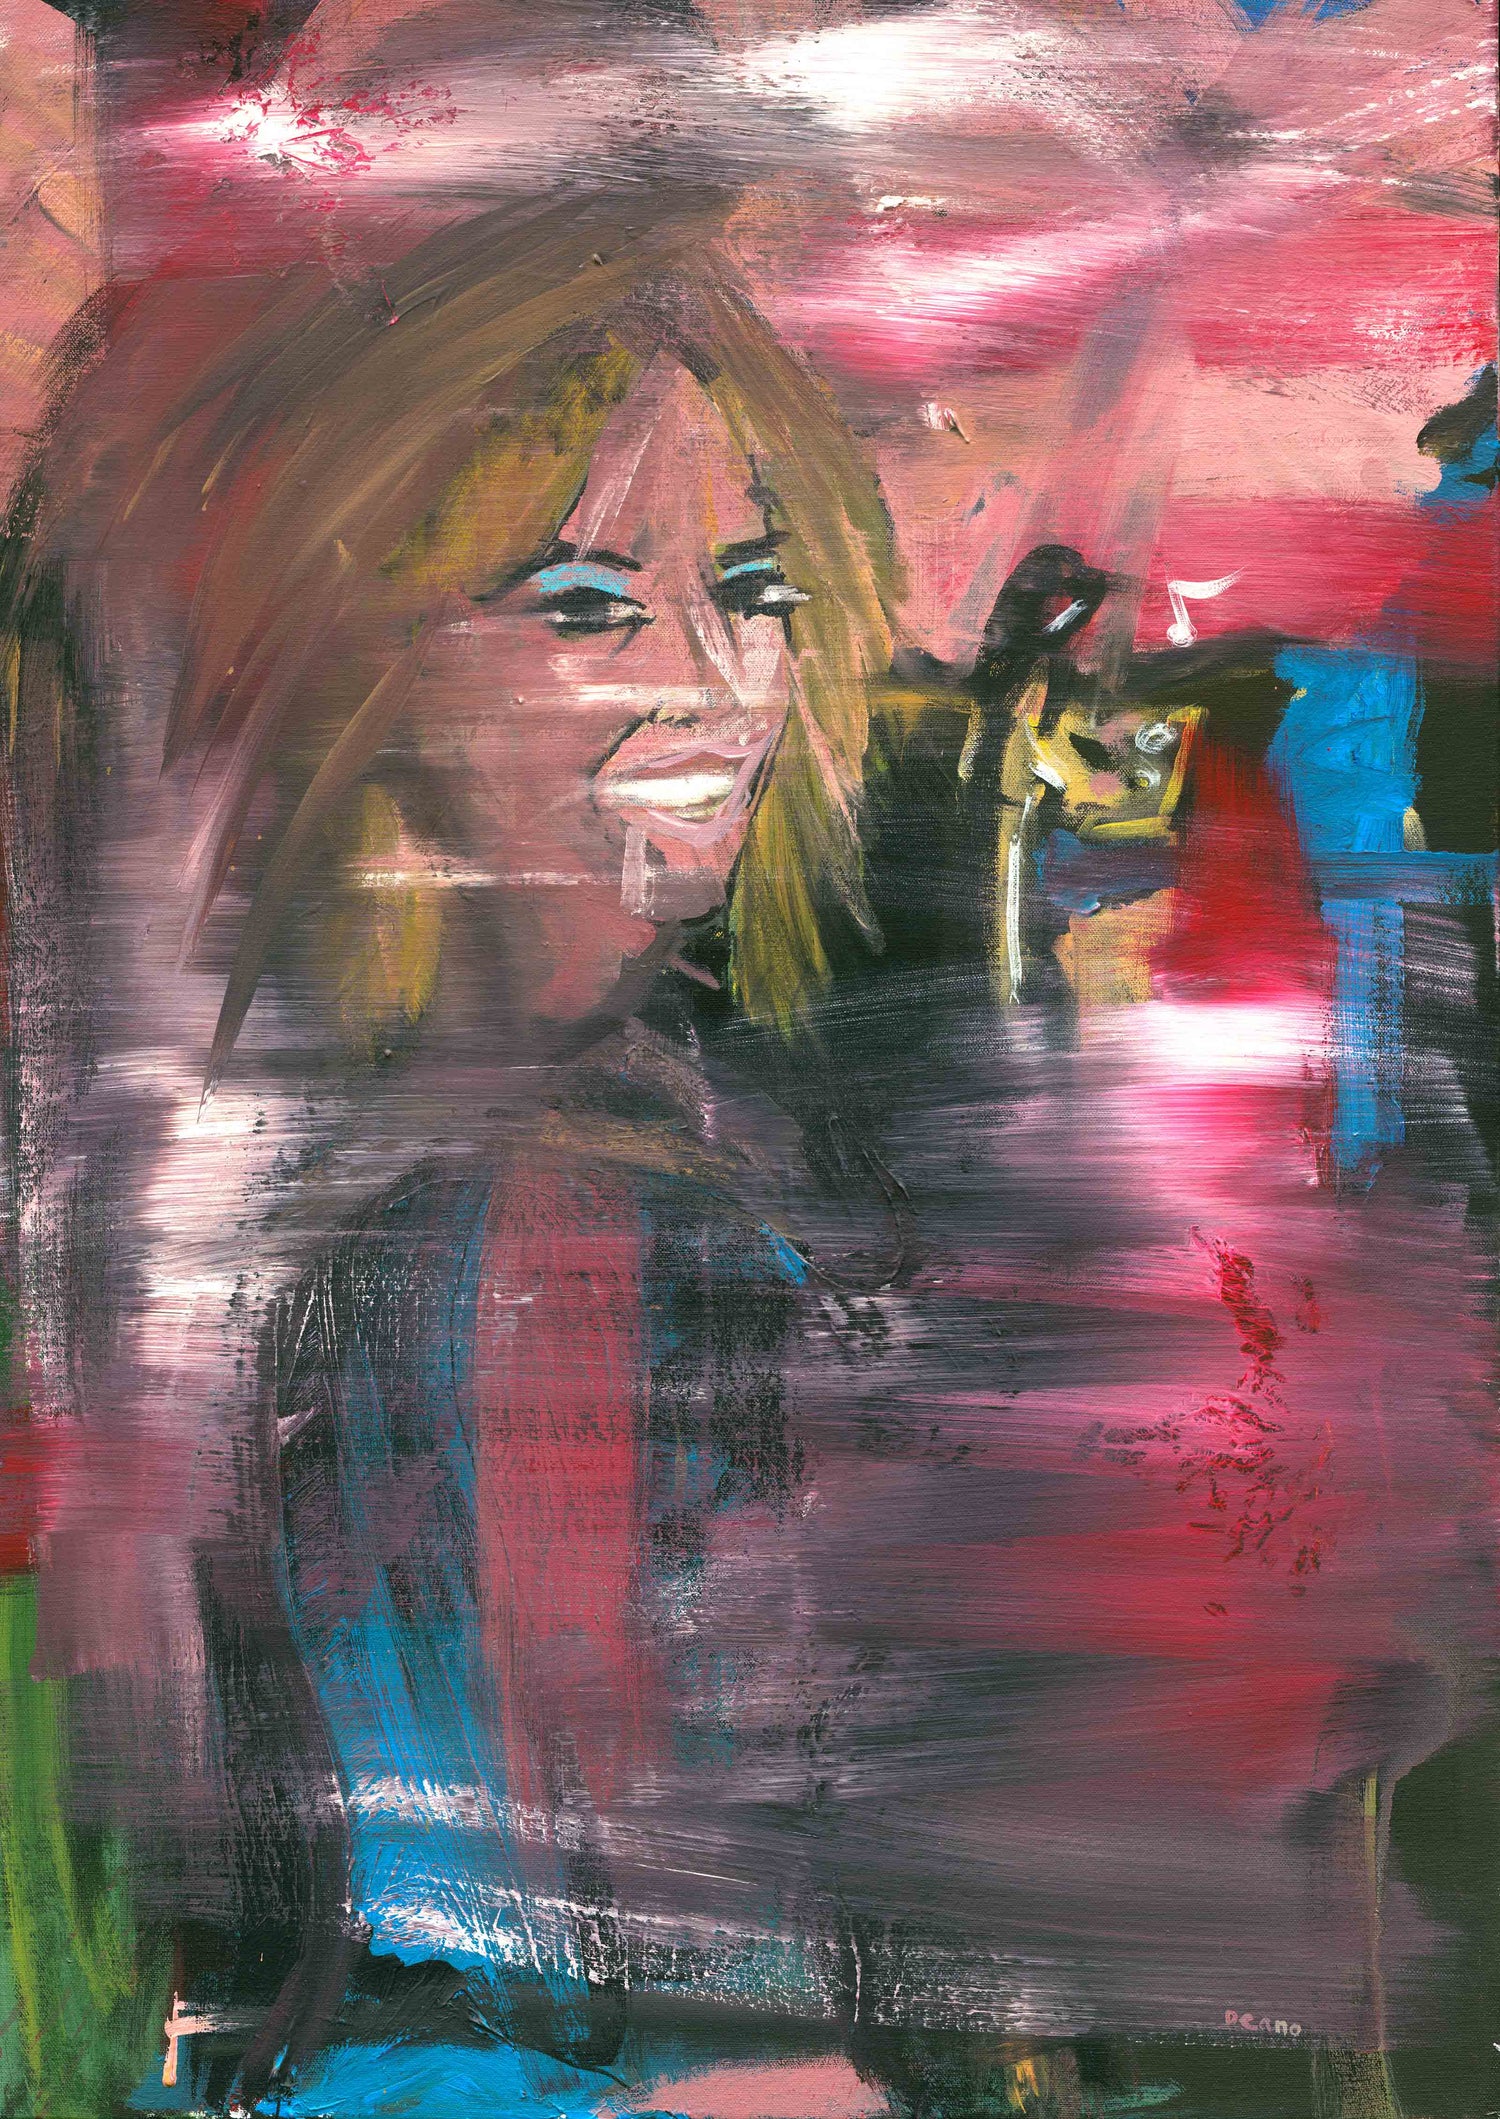 Close up of a limited edition print titled ‘DJ’. It features a smiling DJ surrounded by a vibrant and blurred club scene in bright pinks and blues.